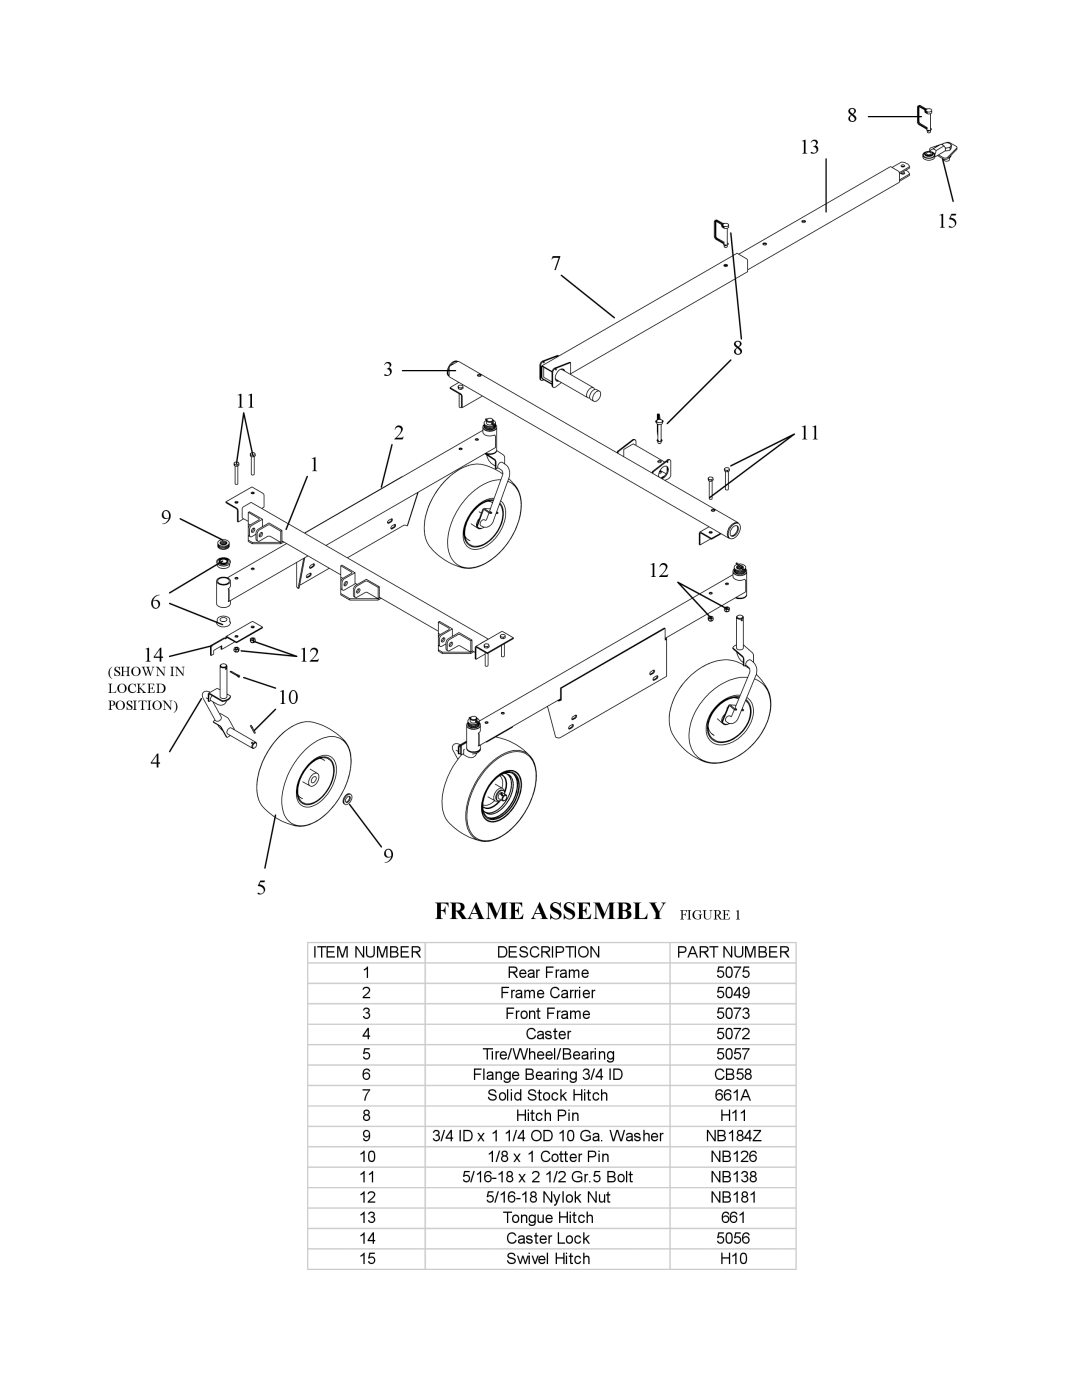 Swisher pol1250f owner manual Frame Assembly Figure, Shown In Locked Position 